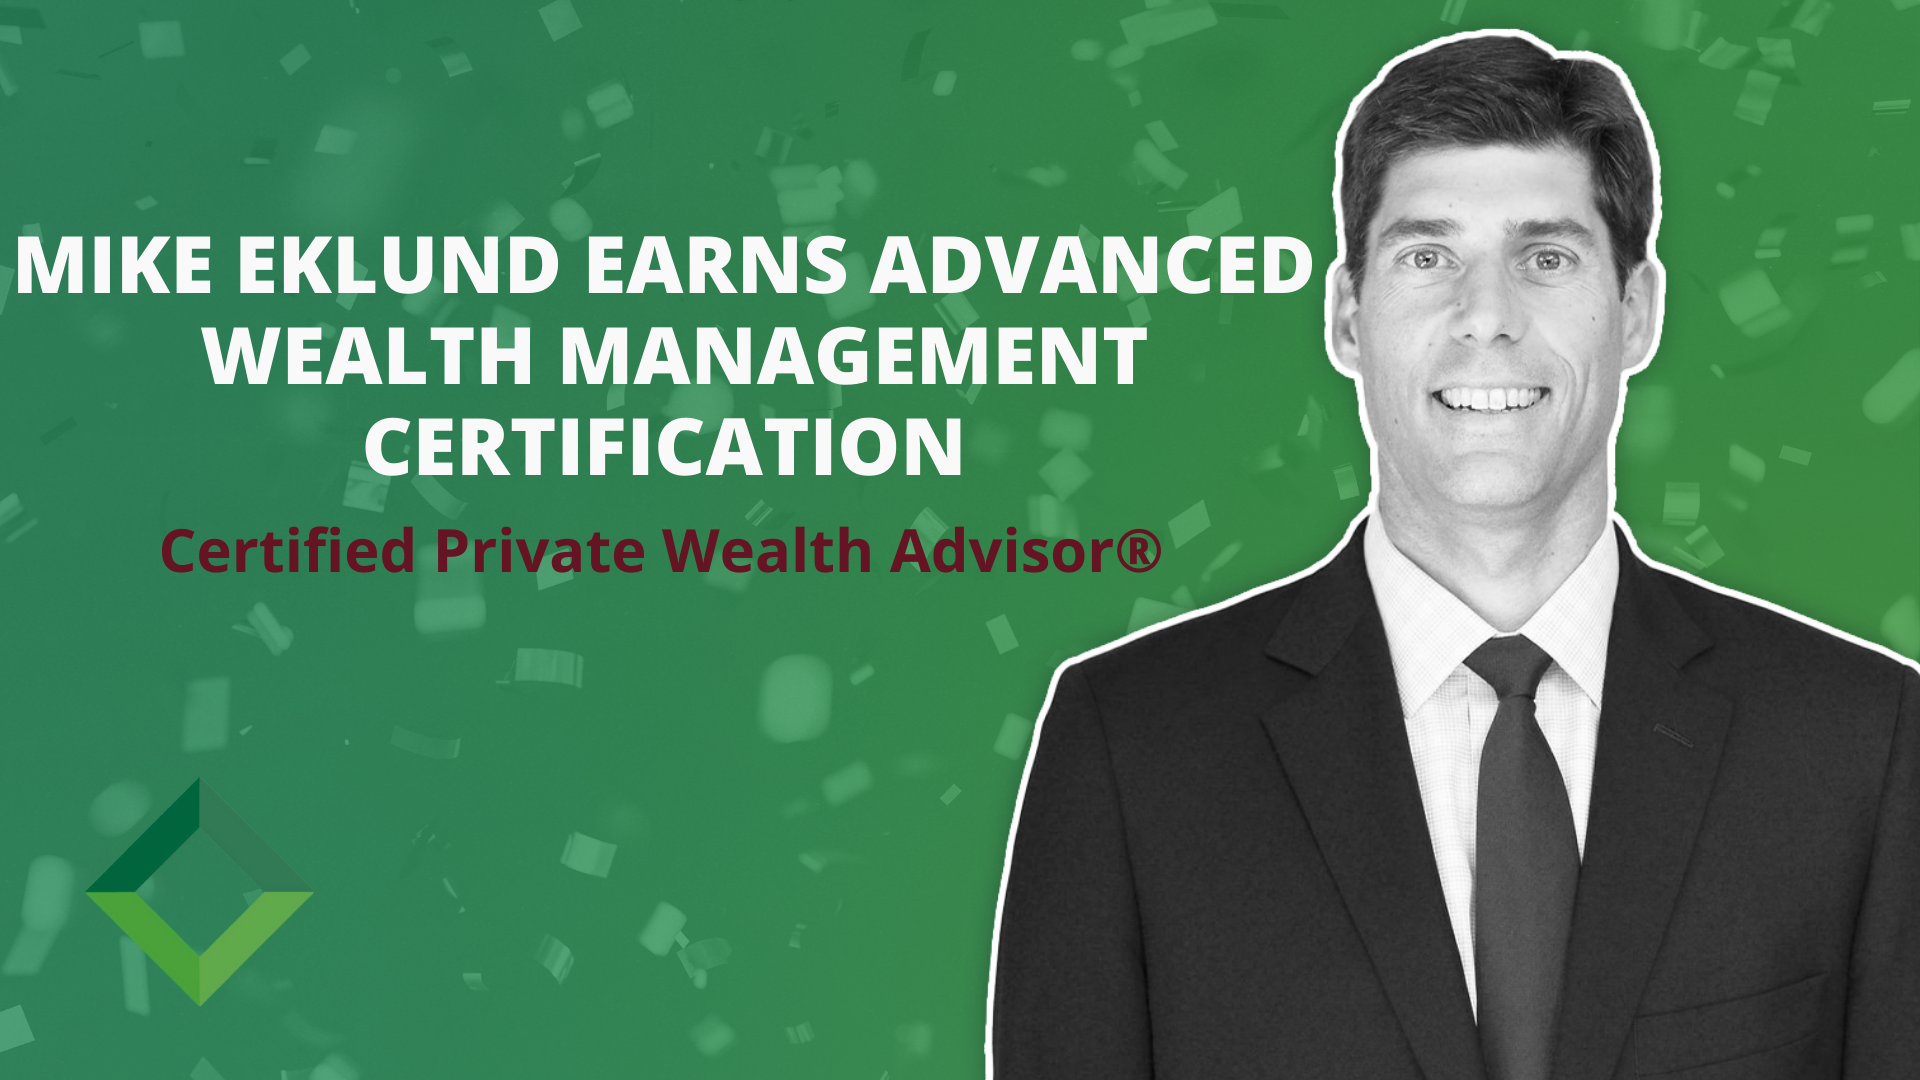 Mike Eklund Earns Advanced Wealth Management Certification – Certified Private Wealth Advisor®